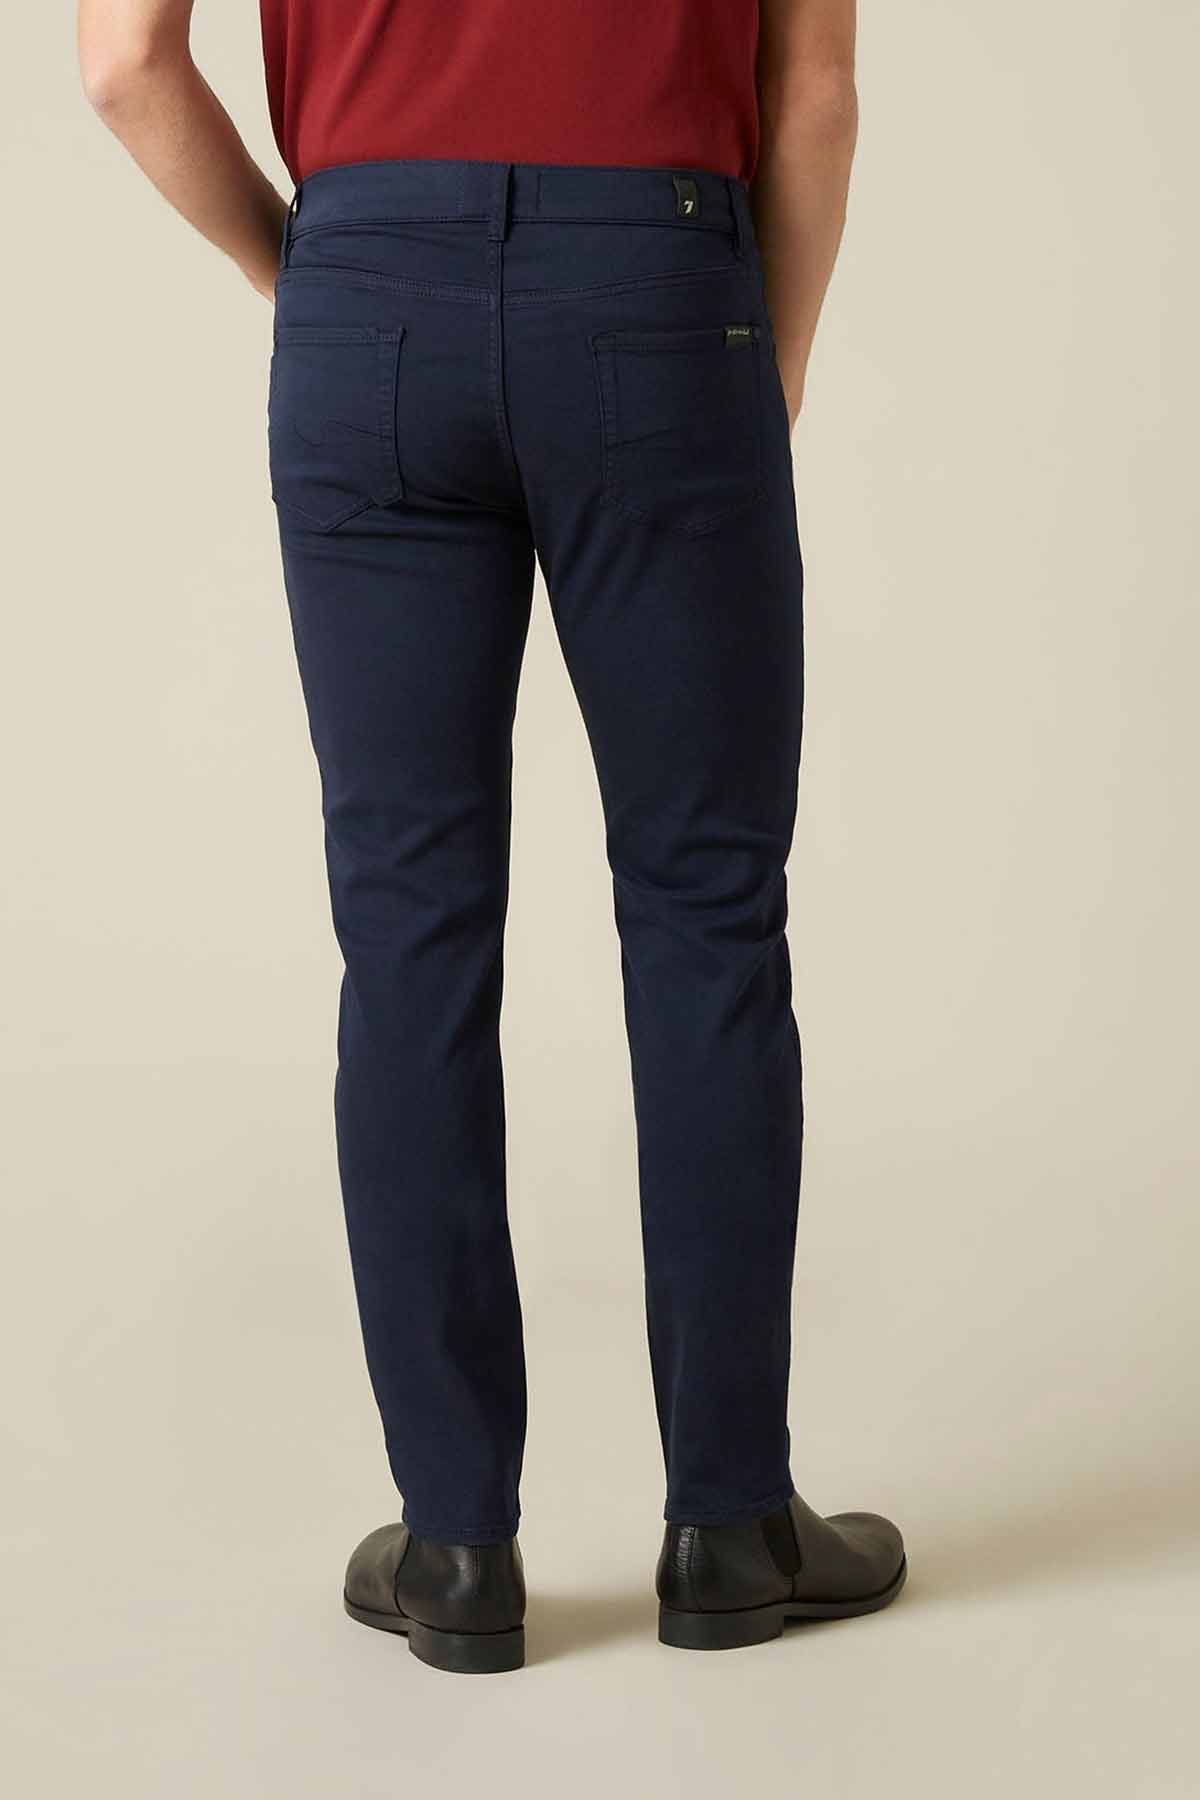 7 For All Mankind Slimmy Tapered Fit Super Stretch Jeans-Libas Trendy Fashion Store